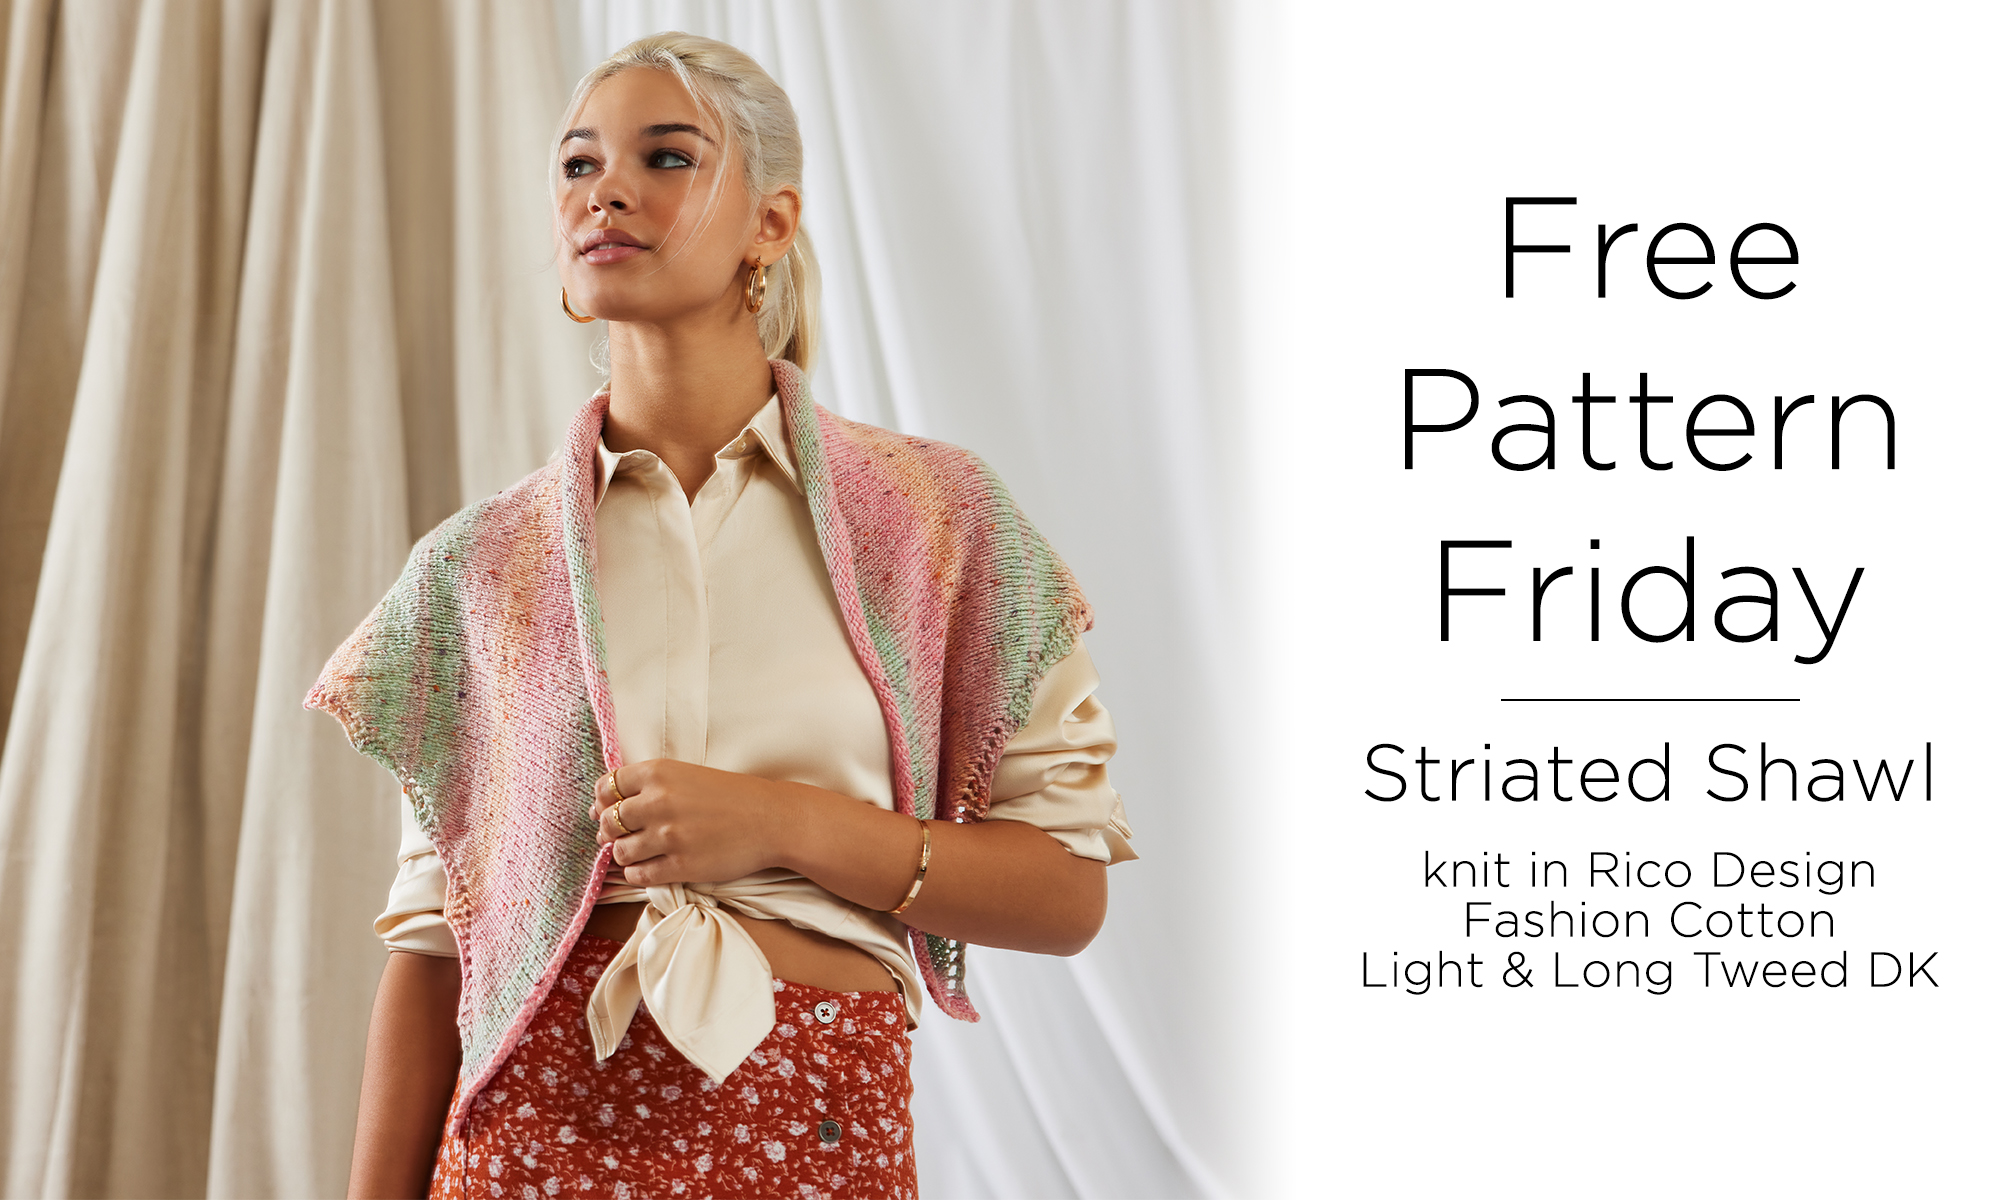 A woman stands wearing a trendy outfit with a shawl draped around her shoulders. The caption reads Free Pattern Friday, Striated Shawl knit in Rico Design, Fashion Cotton Light and Long Tweed DK